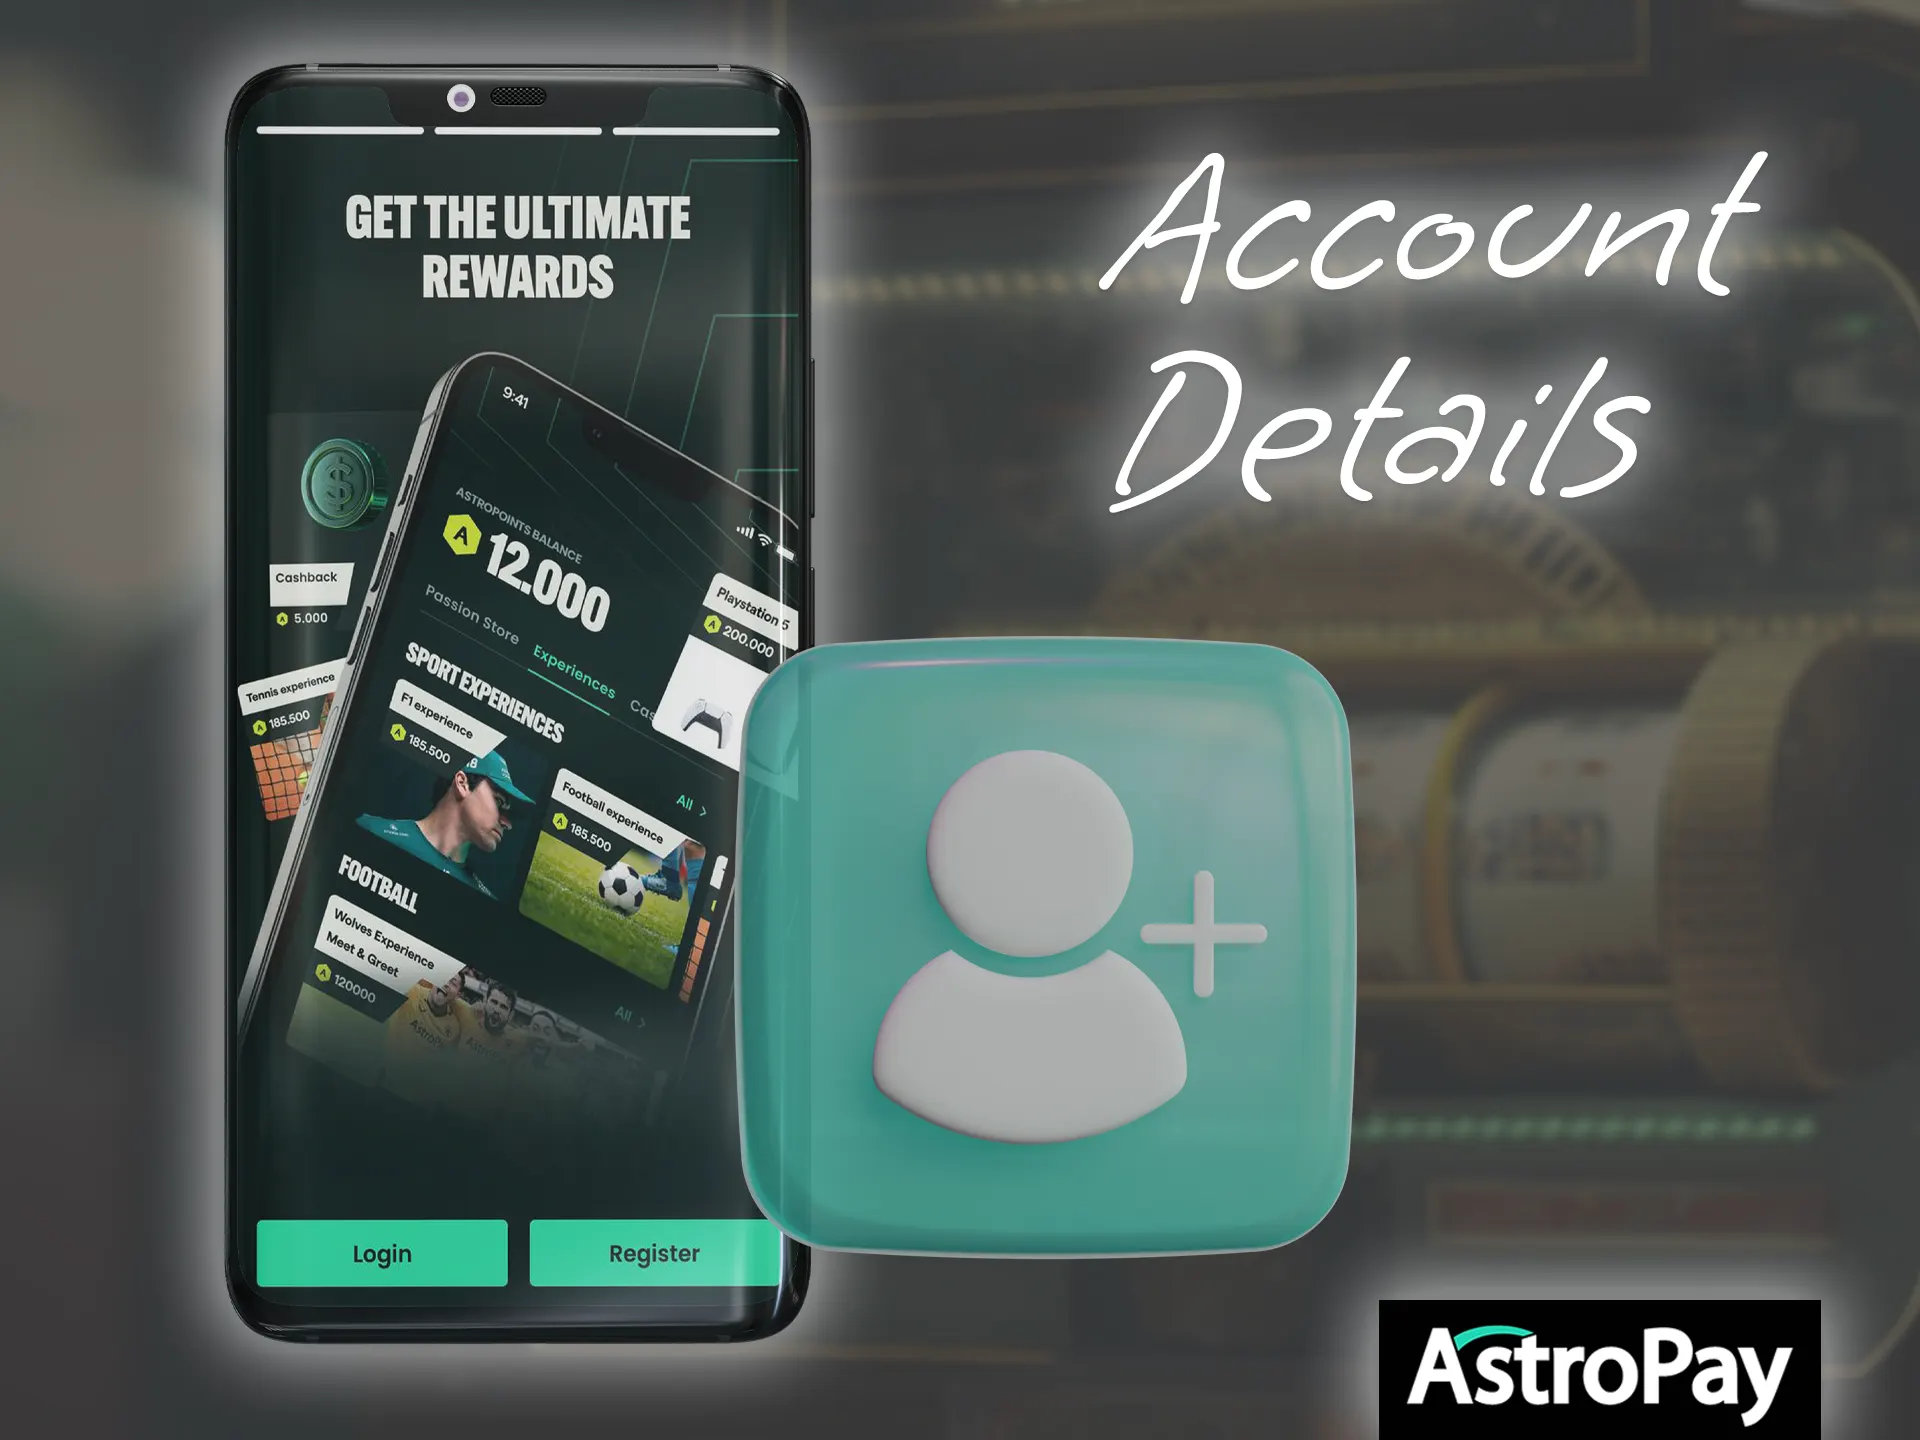 Register a AstroPay account.